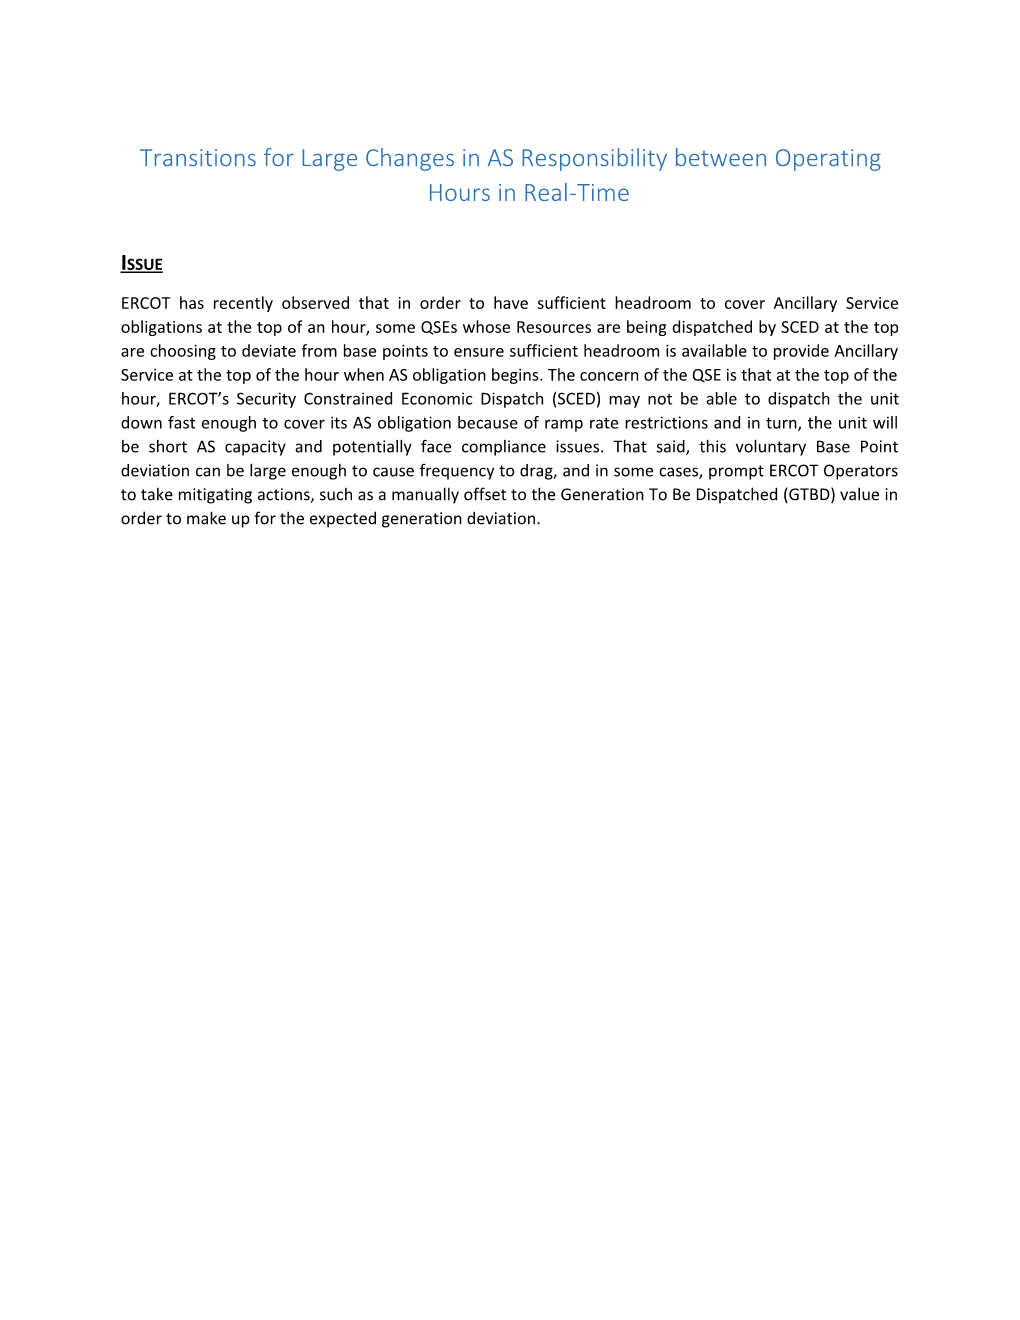 Transitions for Large Changes in AS Responsibility Between Operating Hours in Real-Time